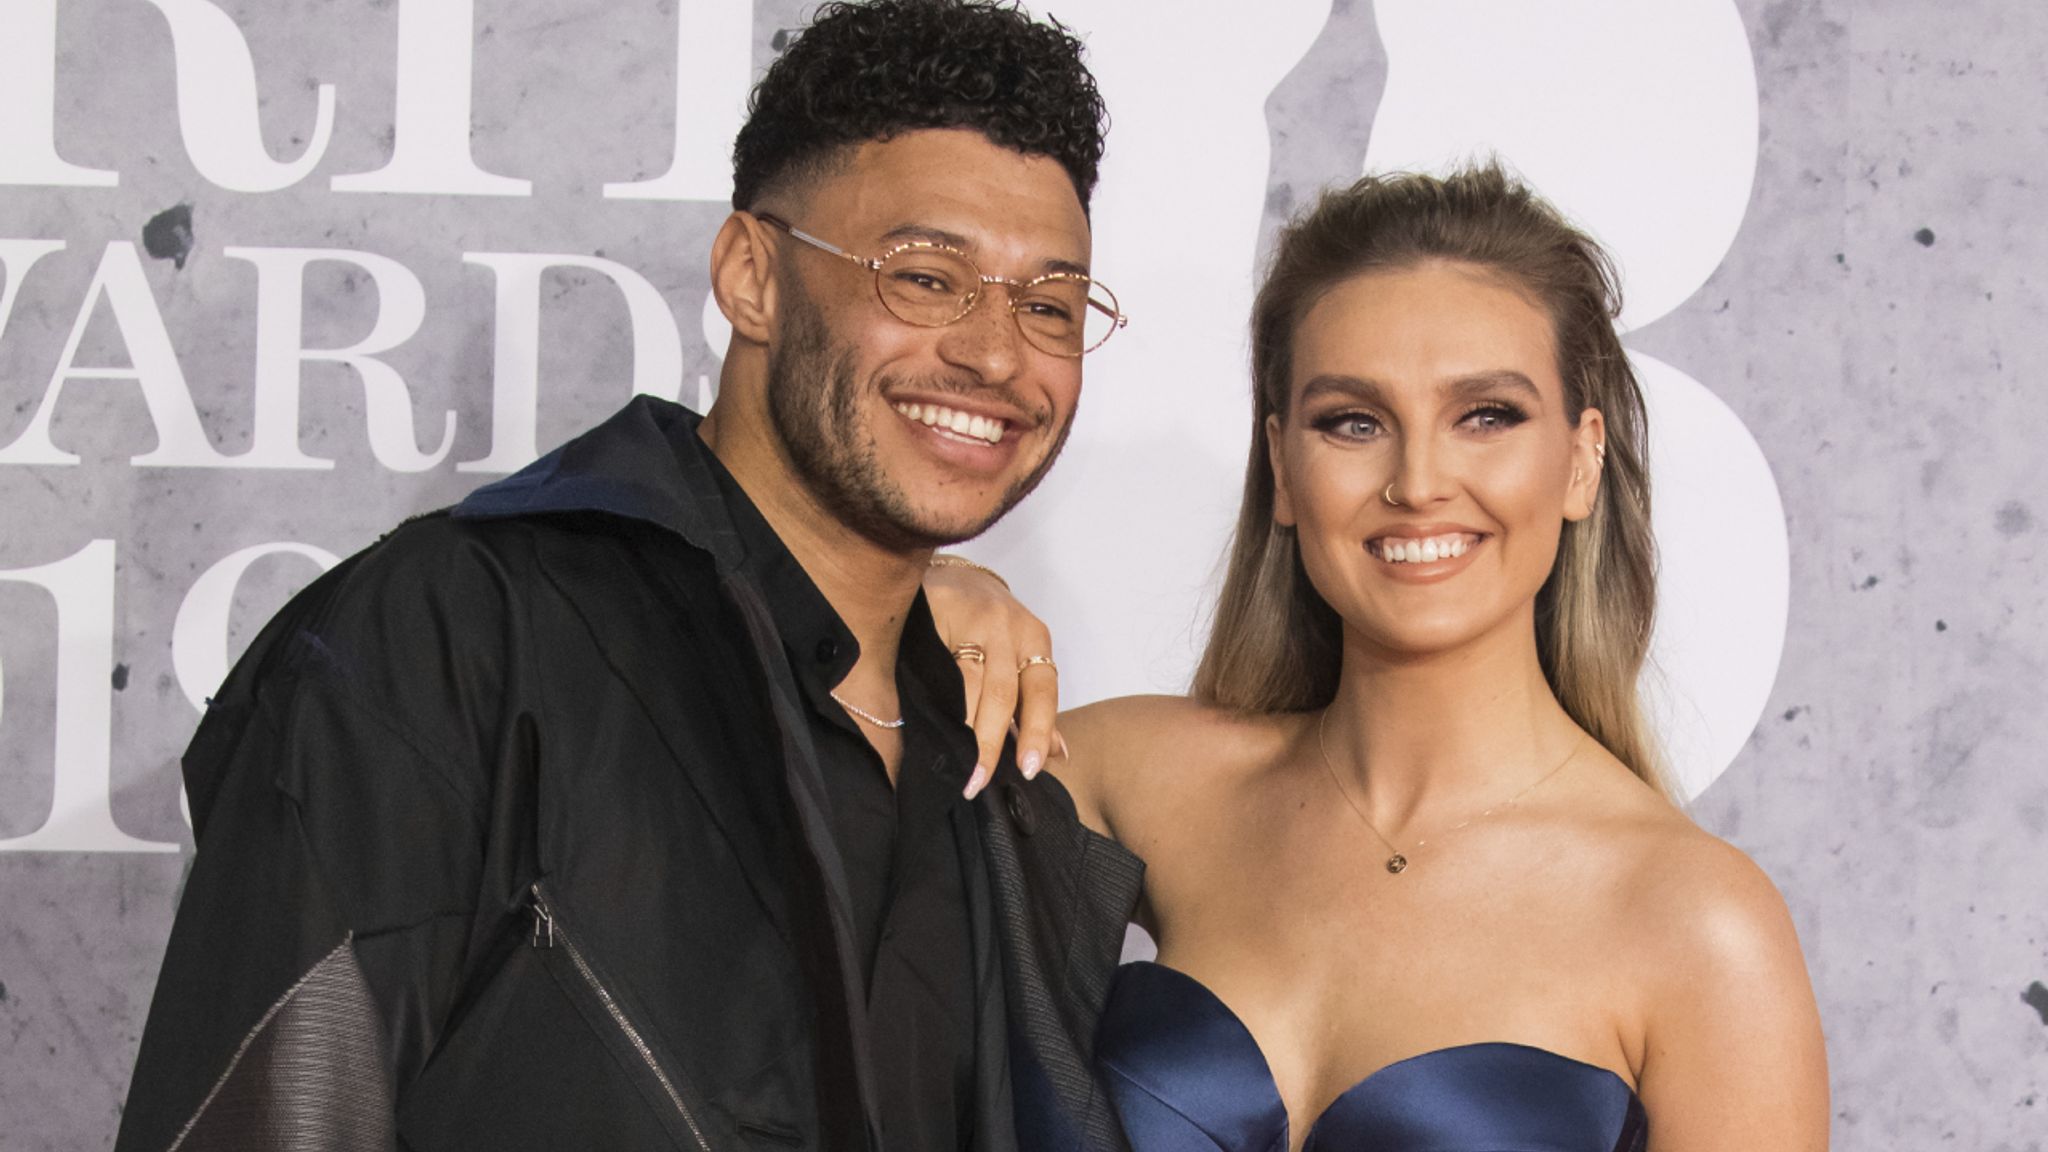 Little Mix star Perrie Edwards shares Cute Pic of Baby Axel on Instagram